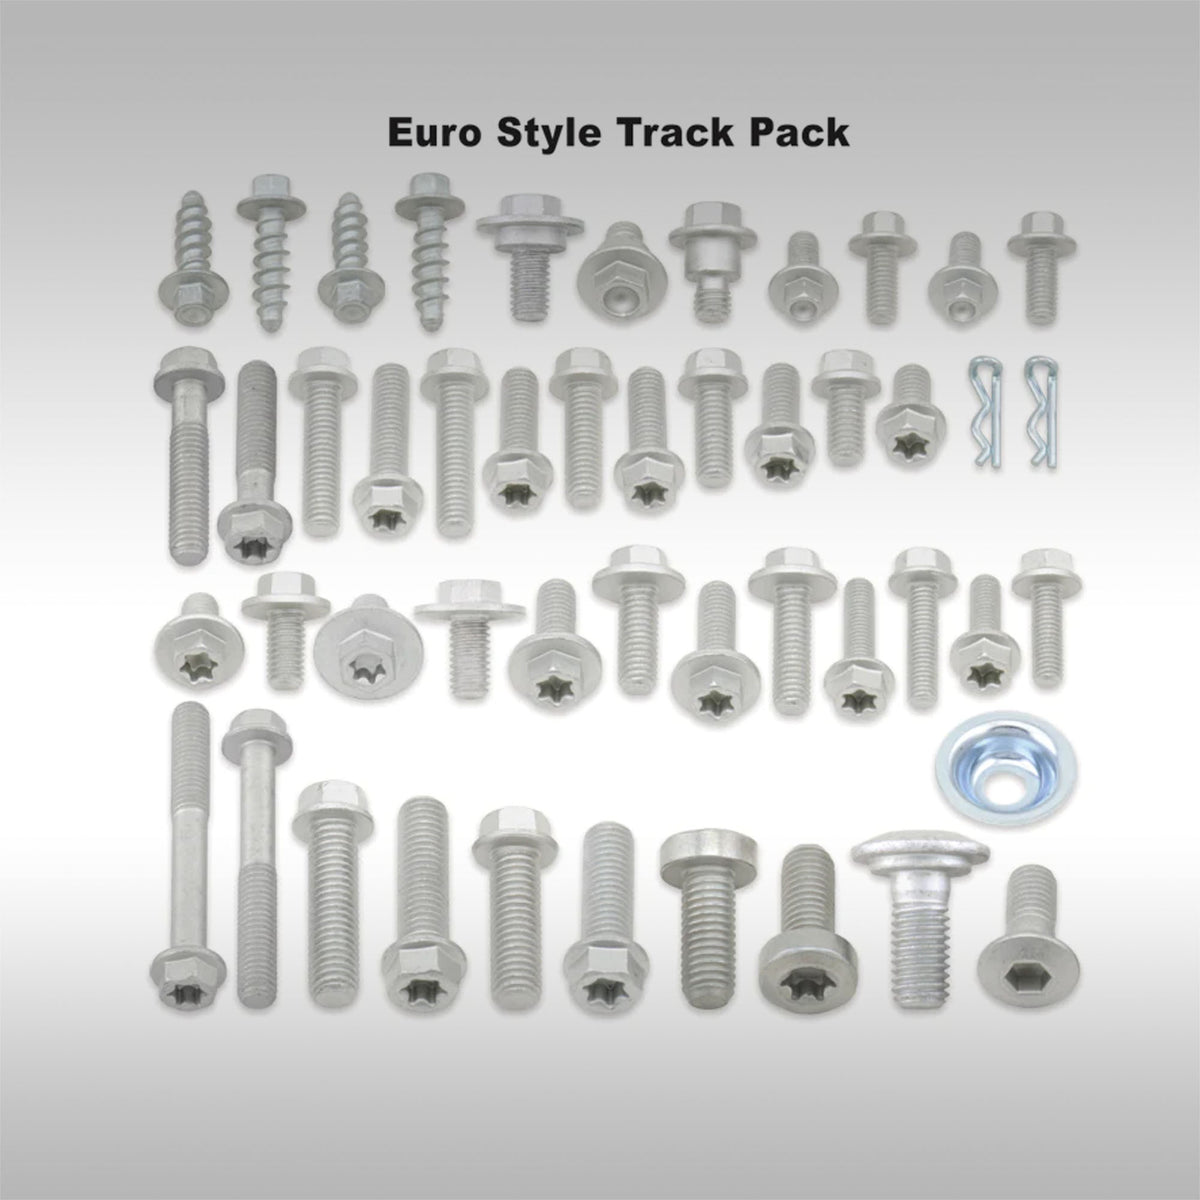 BOLT MOTORCYCLE HARDWARE - EURO STYLE TRACK PACK